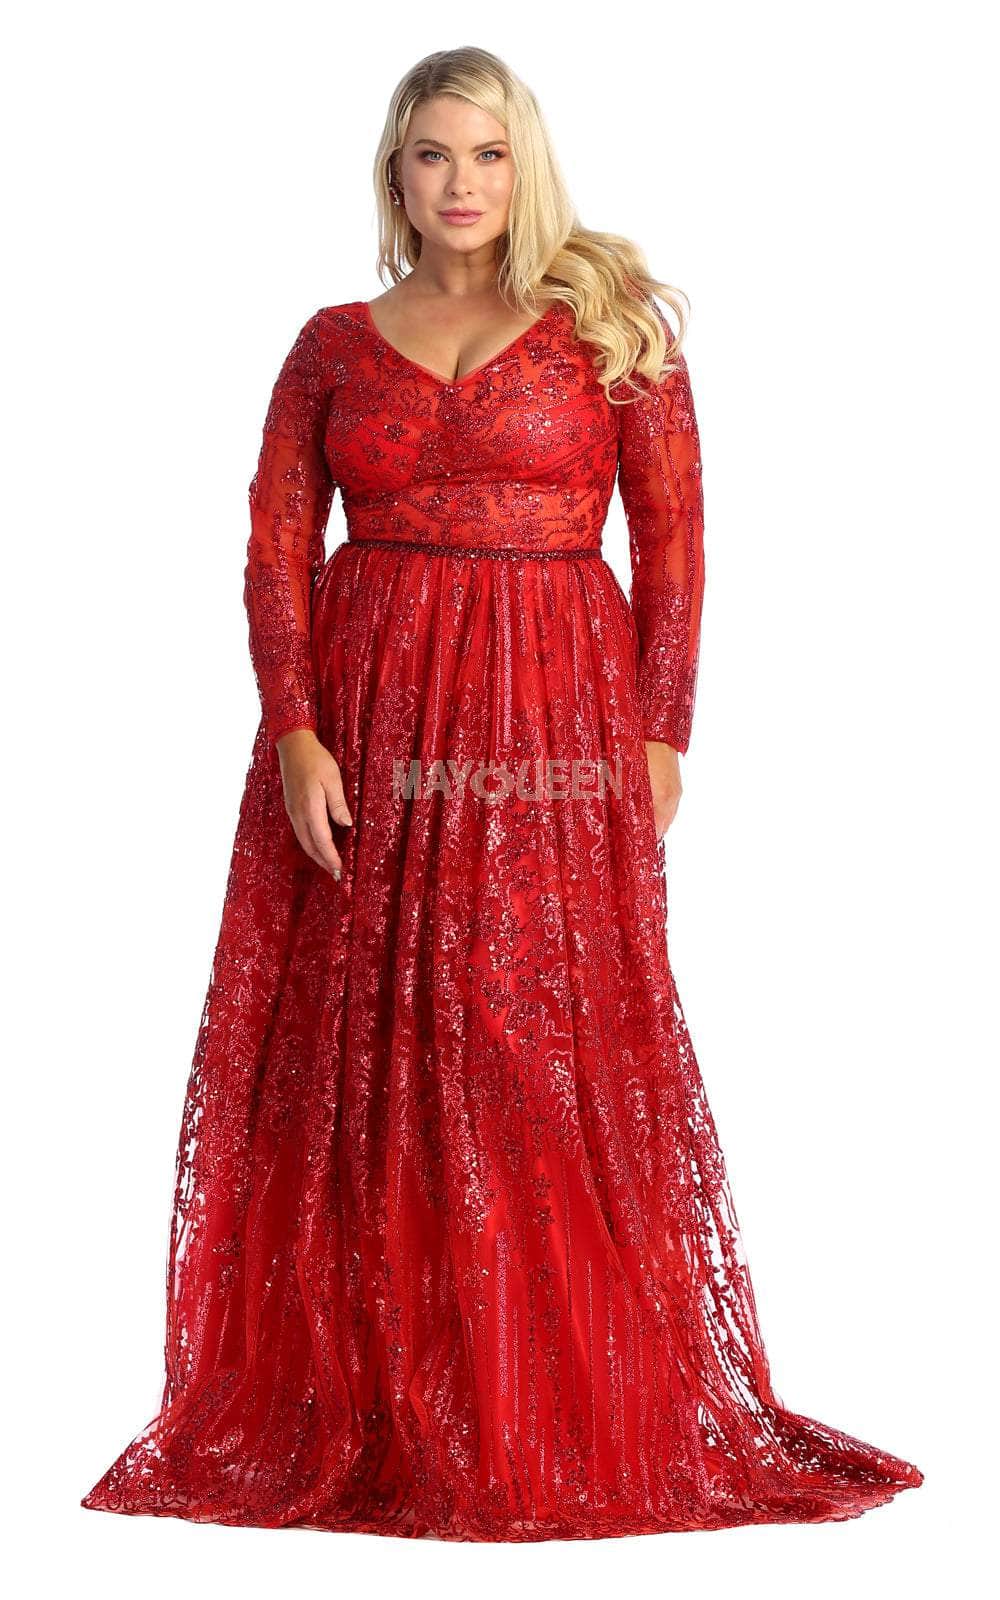 May Queen RQ7920 - Ornated Sheer Bodice Long Sleeve A Line Dress ...